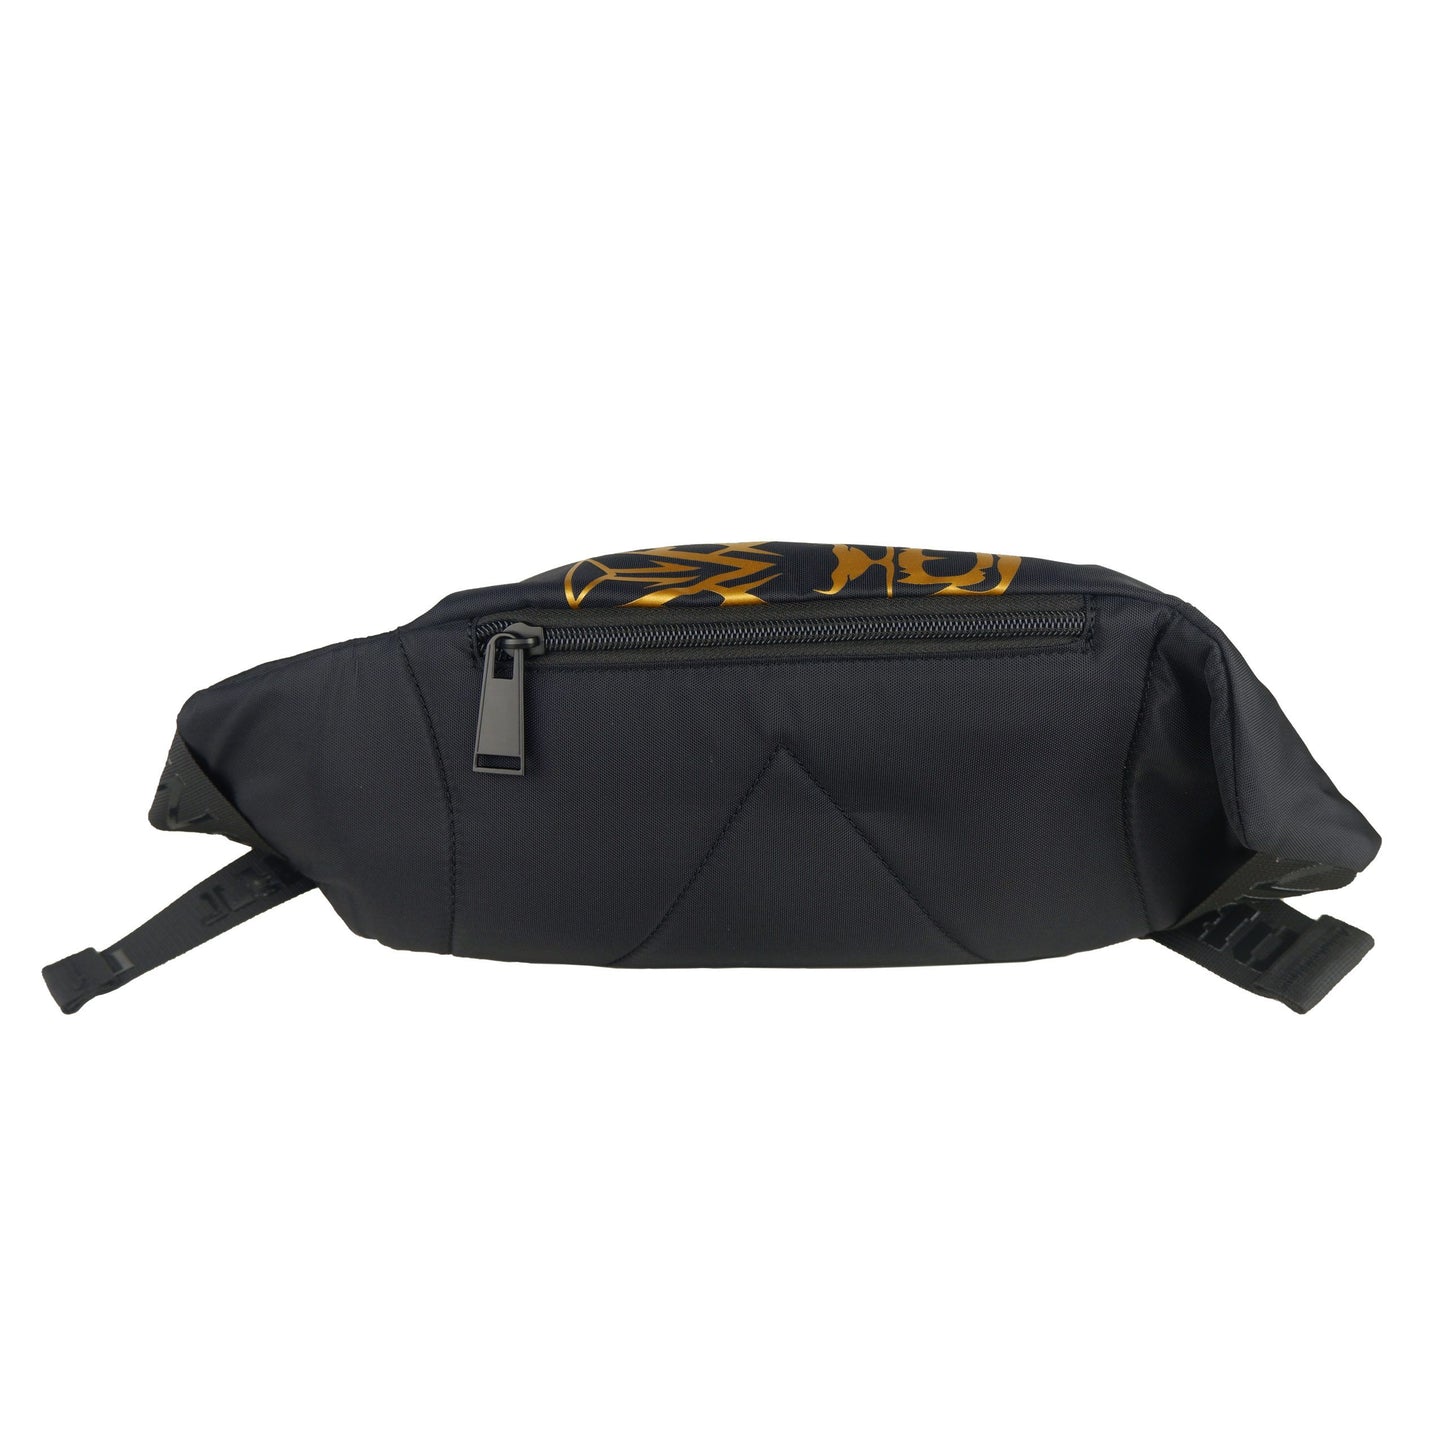 Elegant Black Pouch with Golden Accents